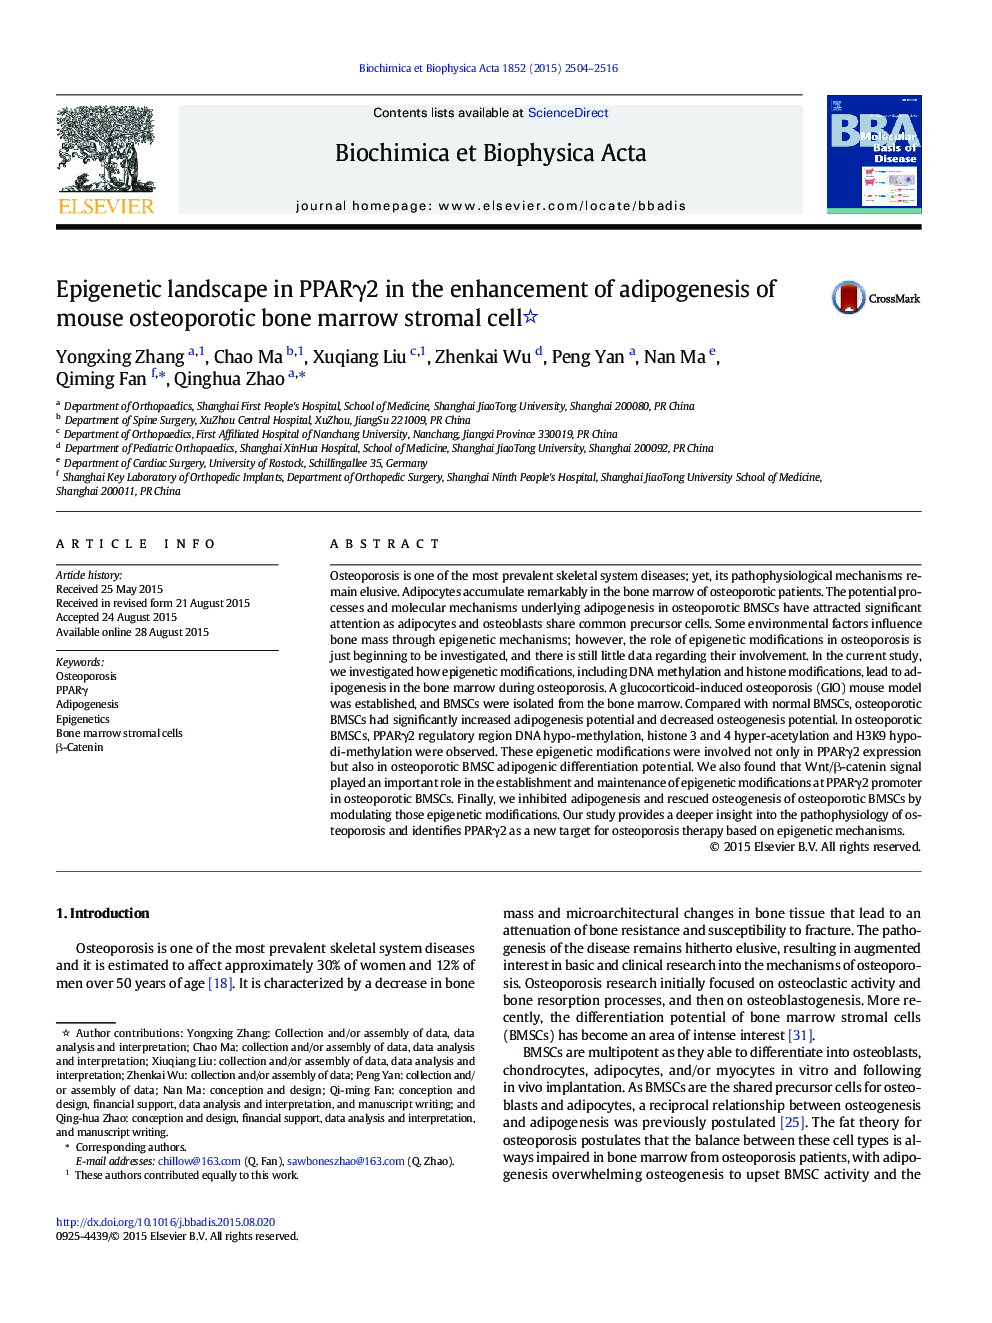 Epigenetic landscape in PPARγ2 in the enhancement of adipogenesis of mouse osteoporotic bone marrow stromal cell 